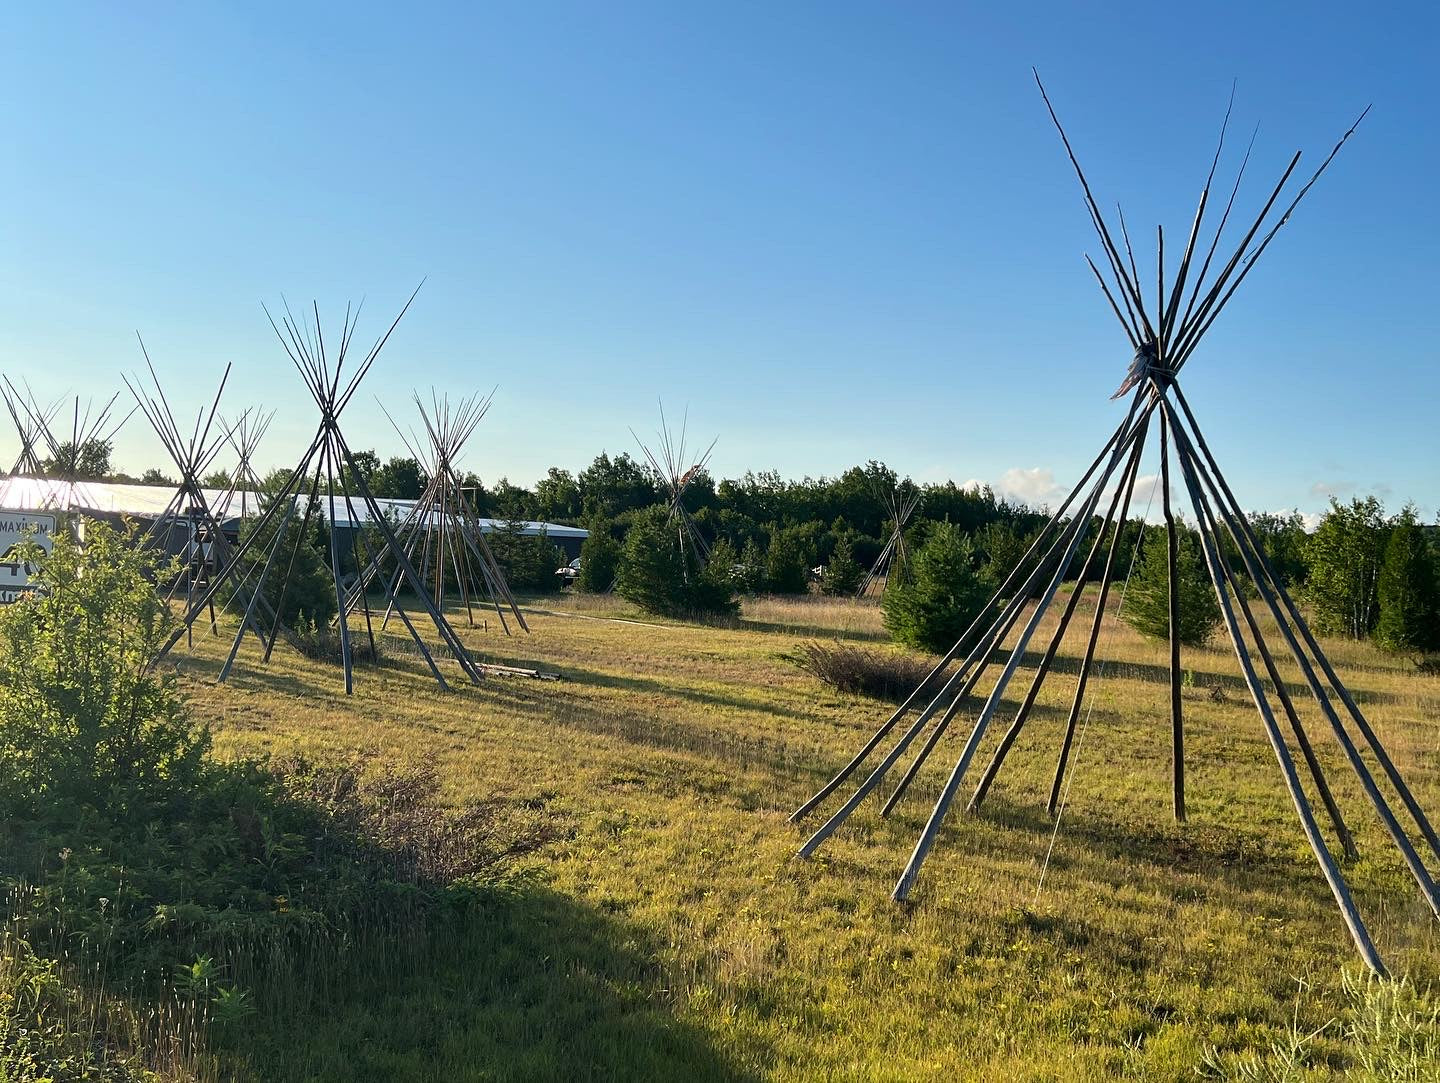 Image of teepee structures in Canada